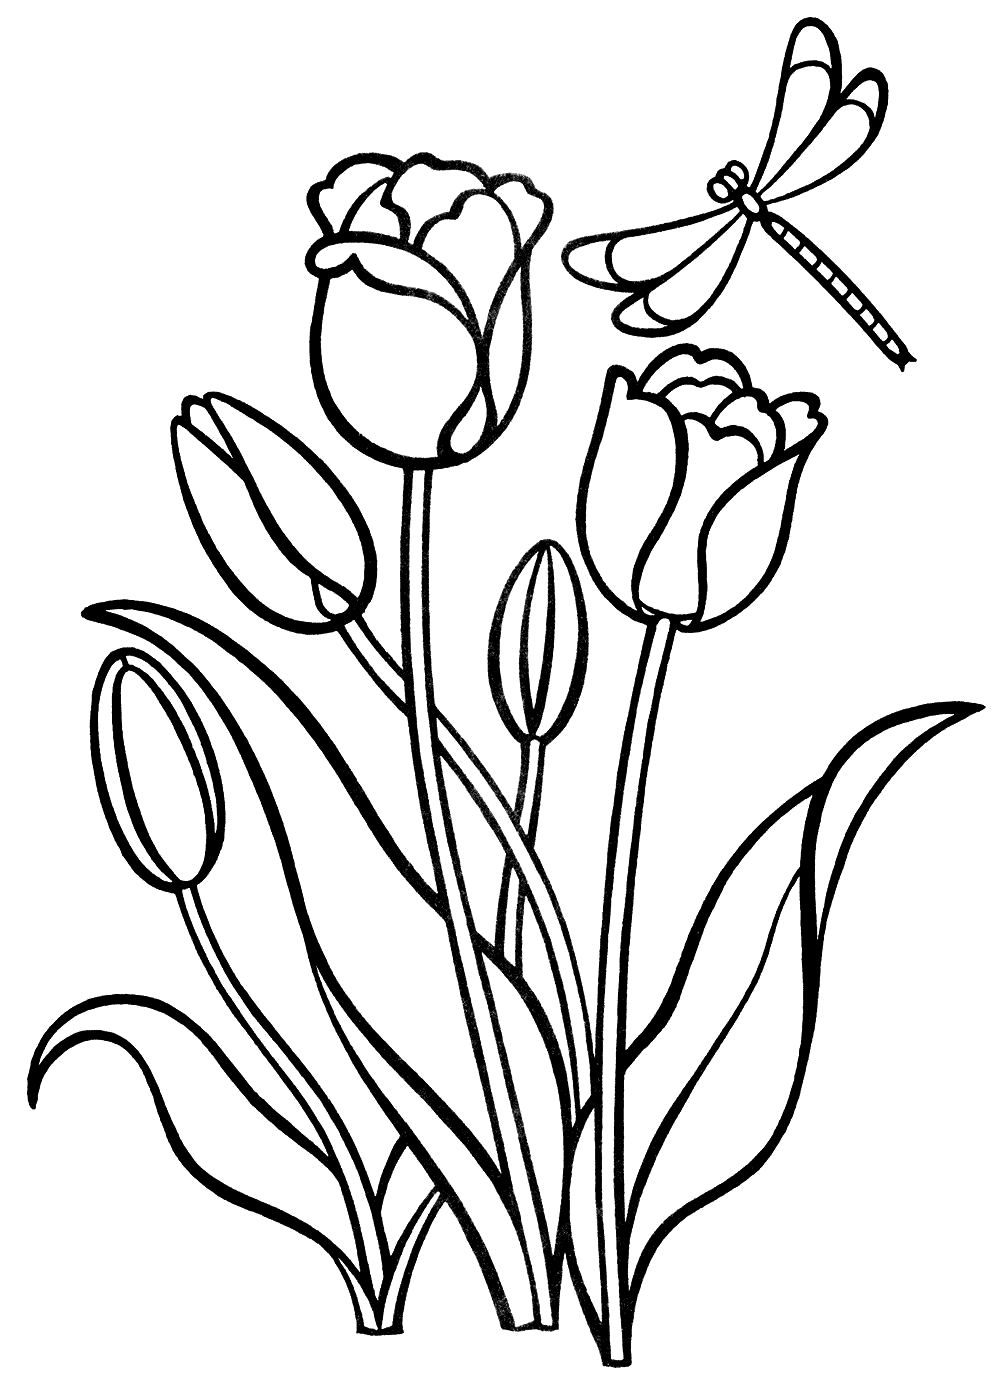 Coloring page - Tulips